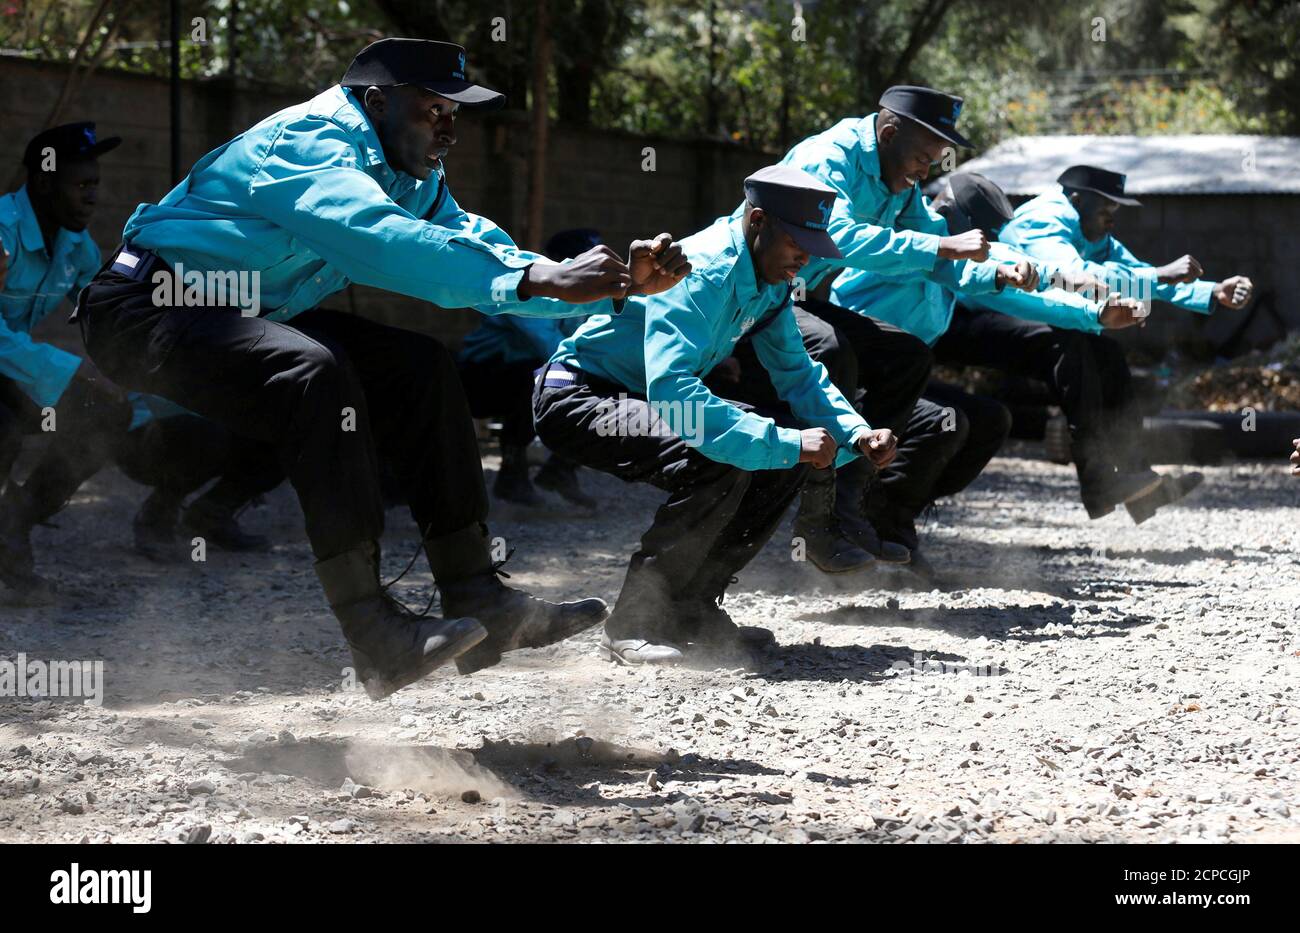 Kenyan security guards participate in physical exercise during martial arts combat training at the Chinese-run Deway Security Group compound in Kenya's capital Nairobi, March 13, 2017. REUTERS/Thomas Mukoya     TPX IMAGES OF THE DAY Stock Photo